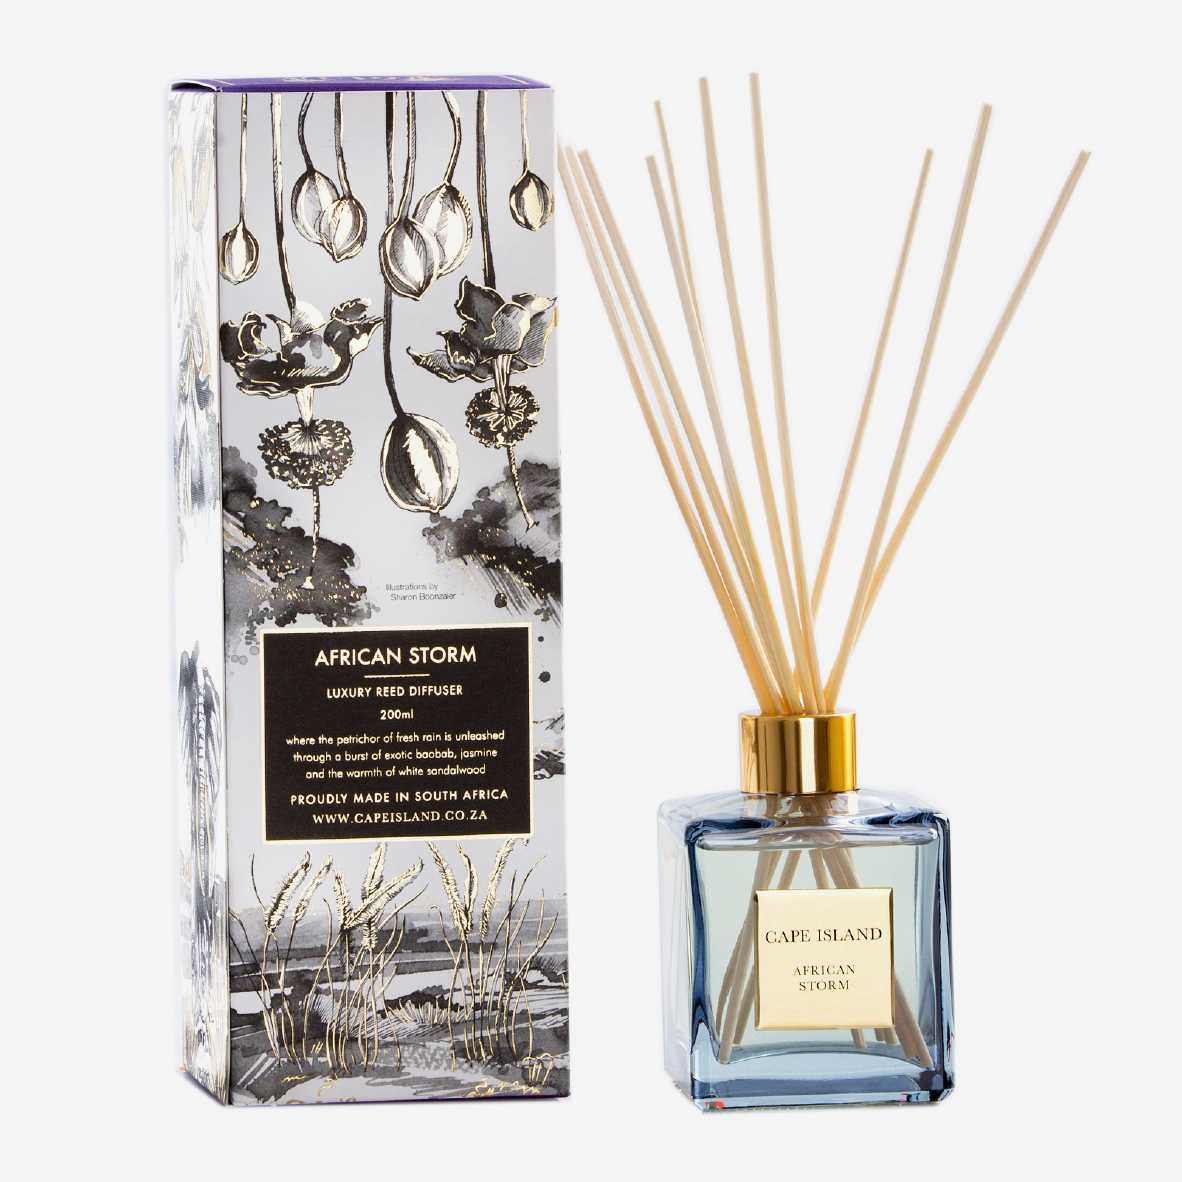 Illustrated Fragrance Diffuser - African Storm